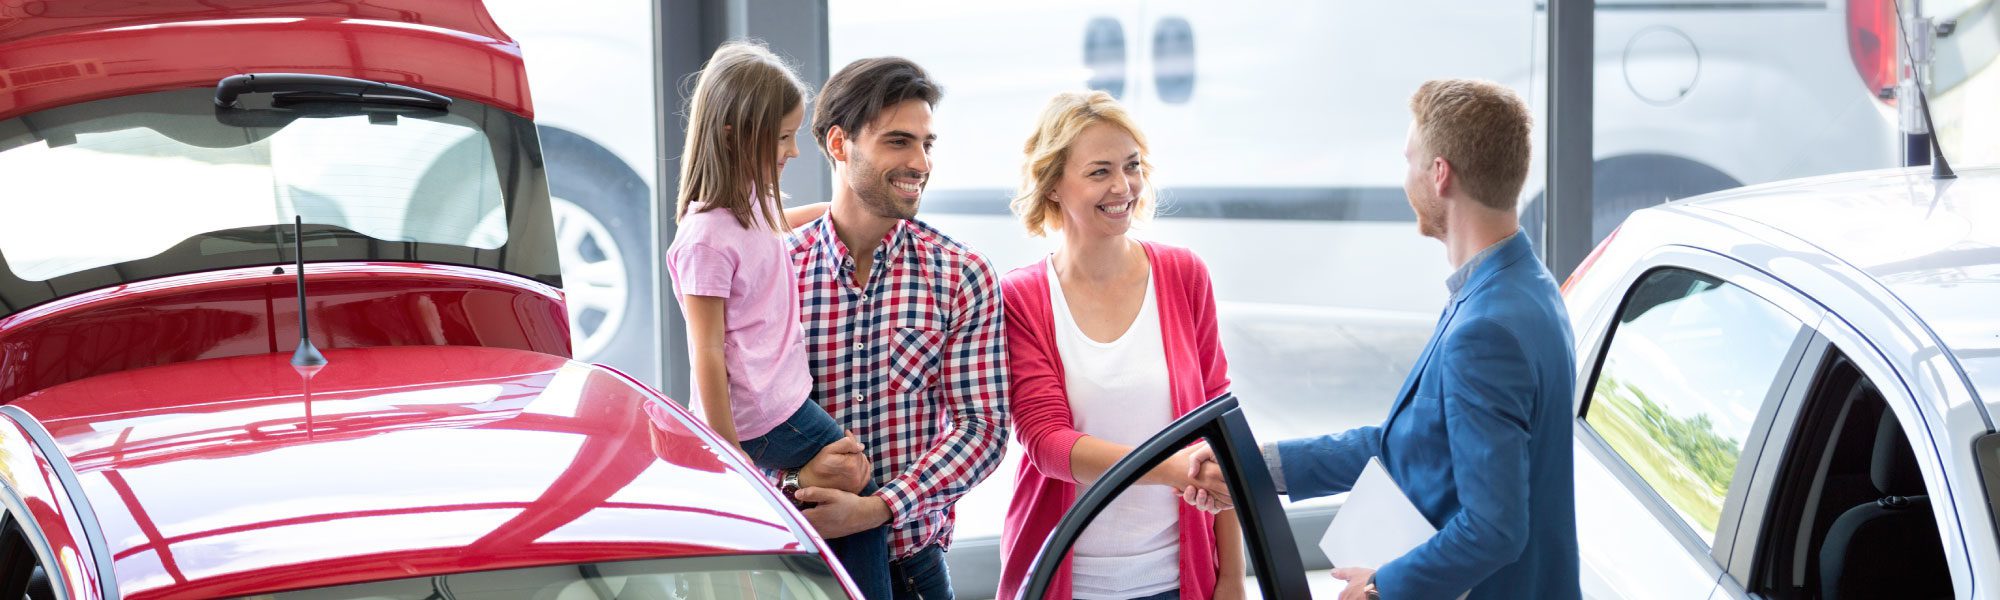 family at car dealership with salesman